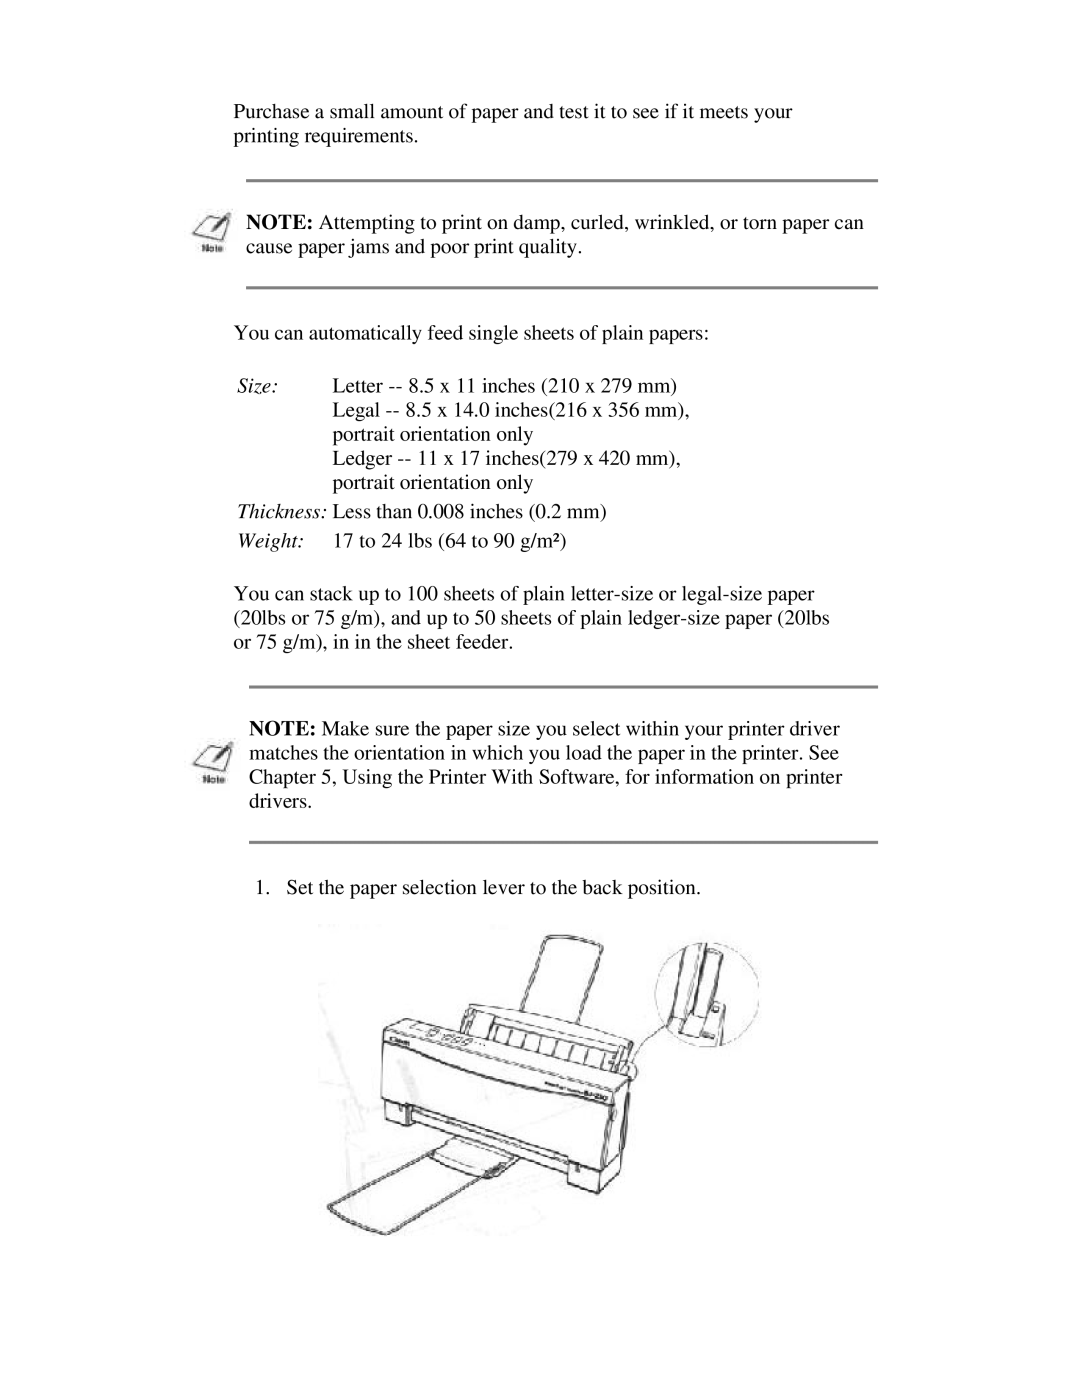 Canon BJ-230 user manual You can automatically feed single sheets of plain papers, Thickness Less than 0.008 inches 0.2 mm 